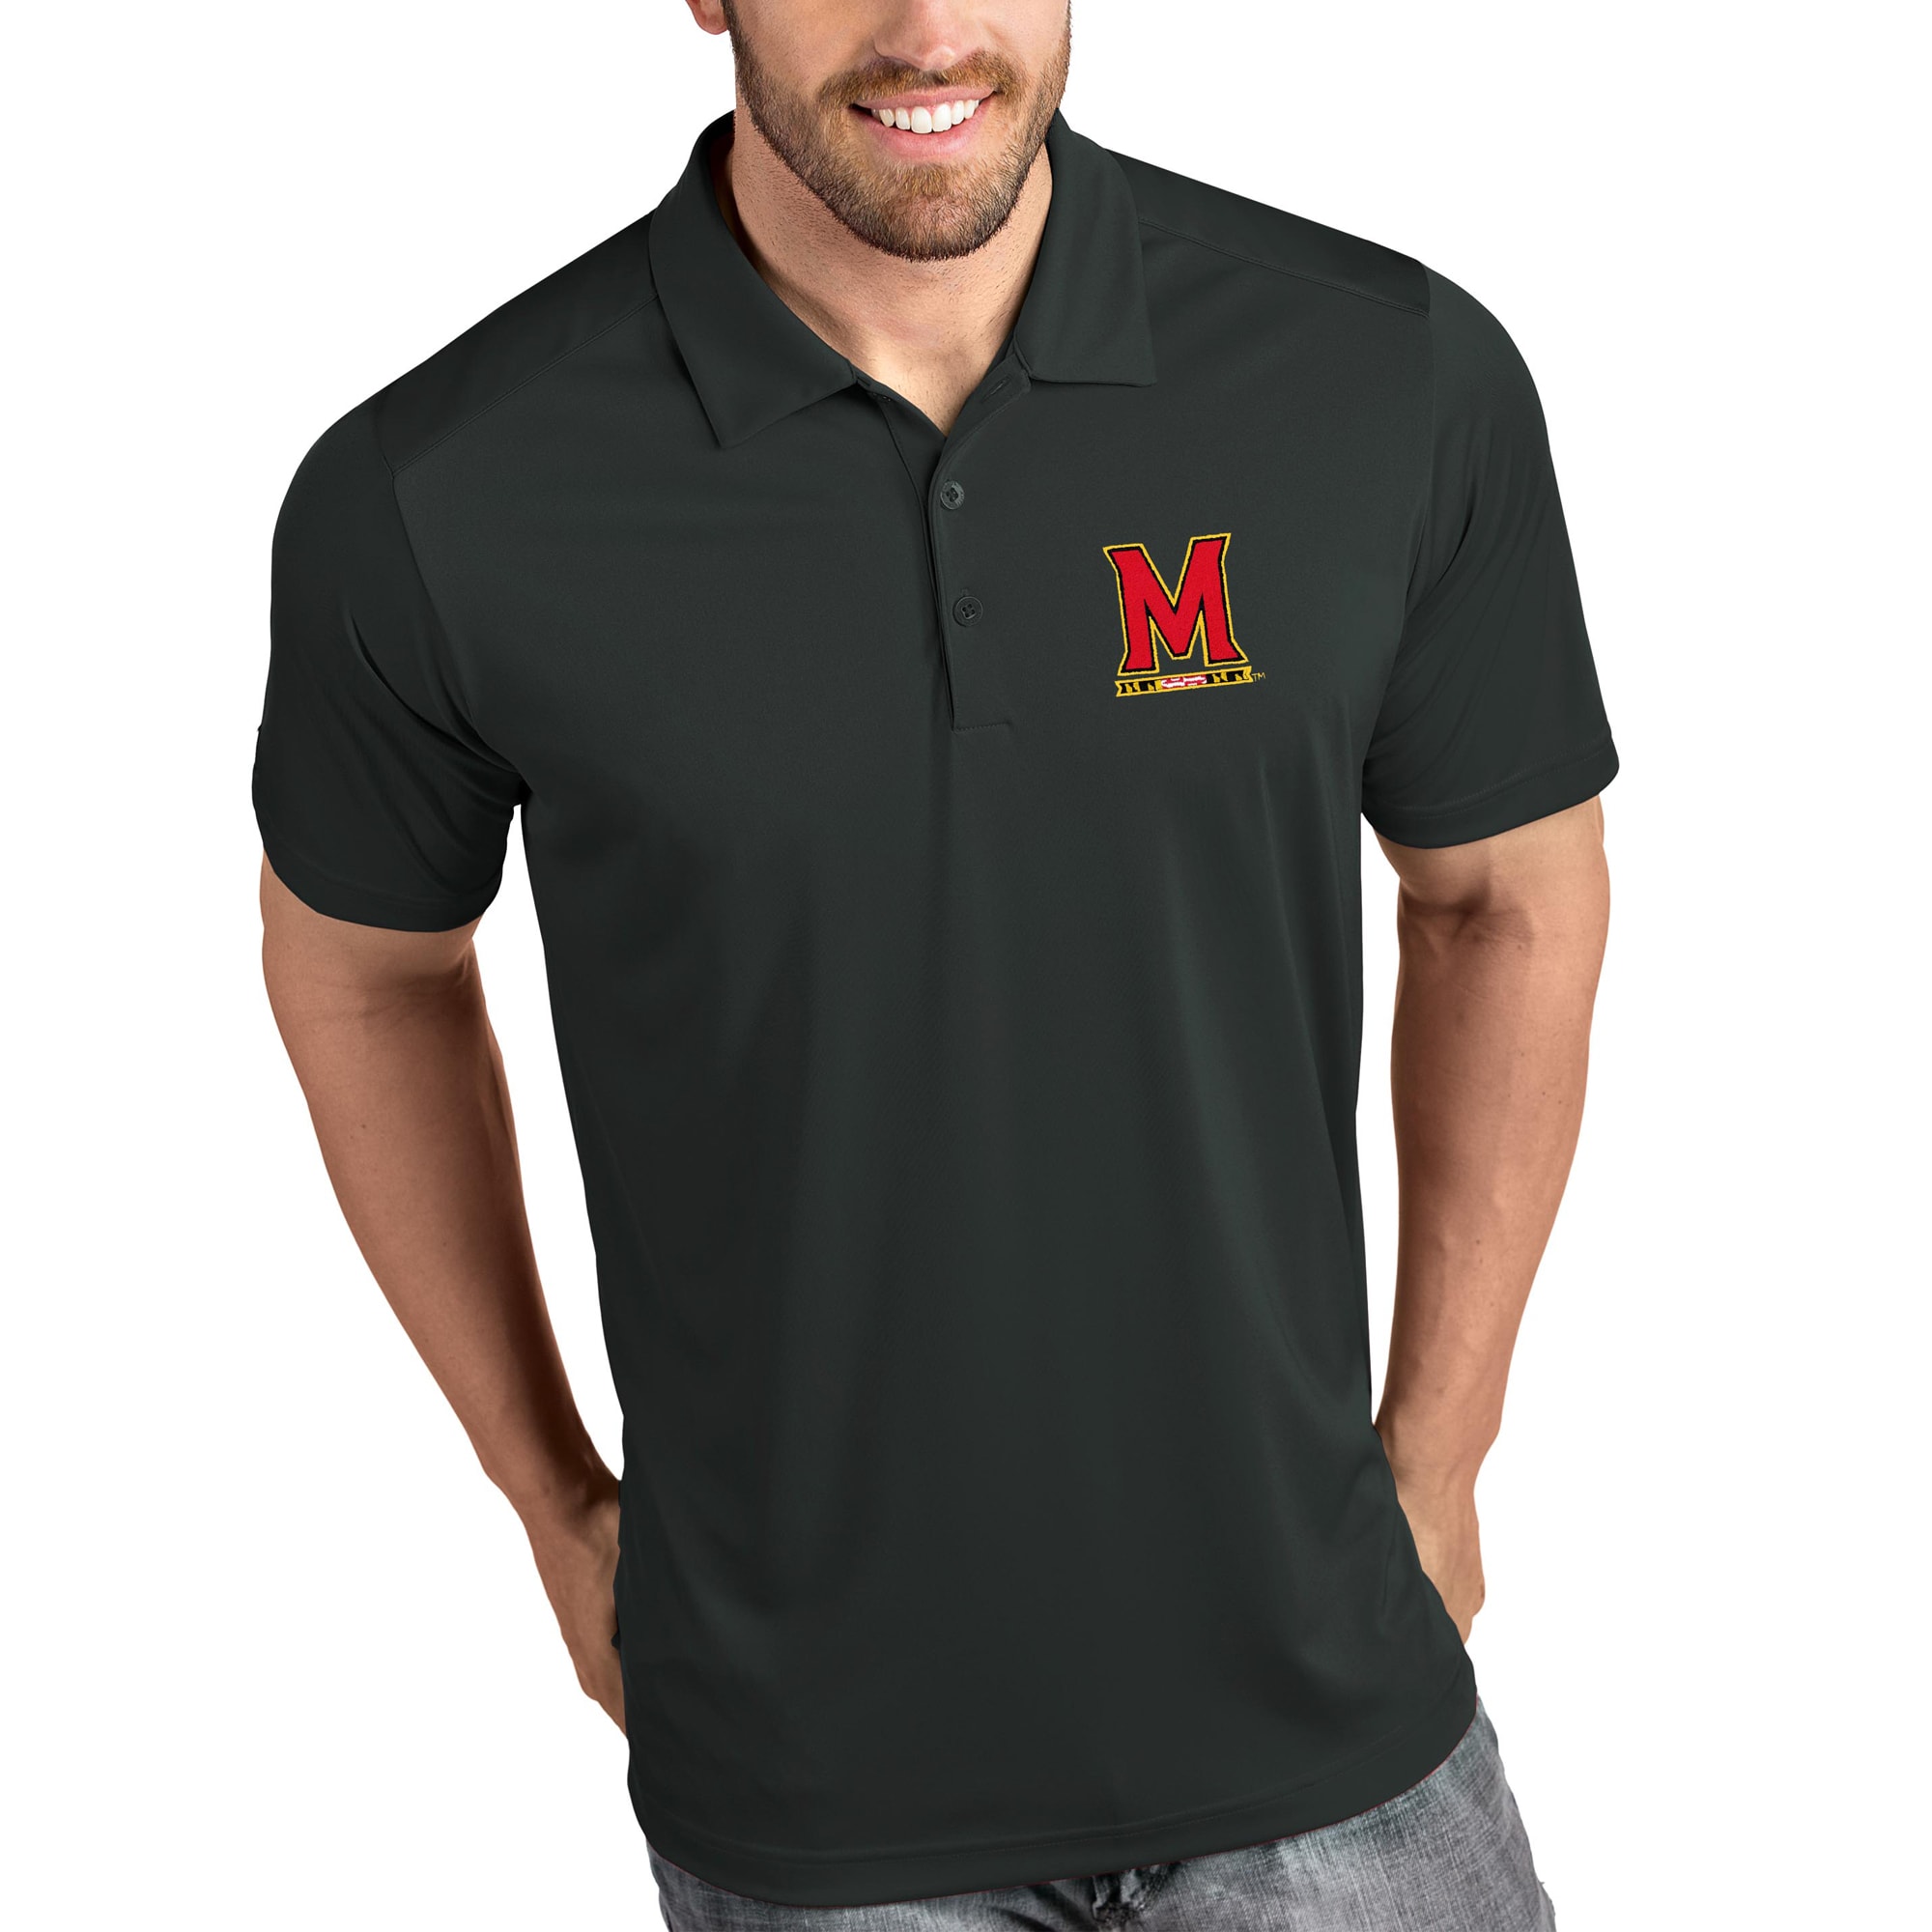 Maryland Terrapins Antigua Tribute Polo - Charcoal - image 1 of 1